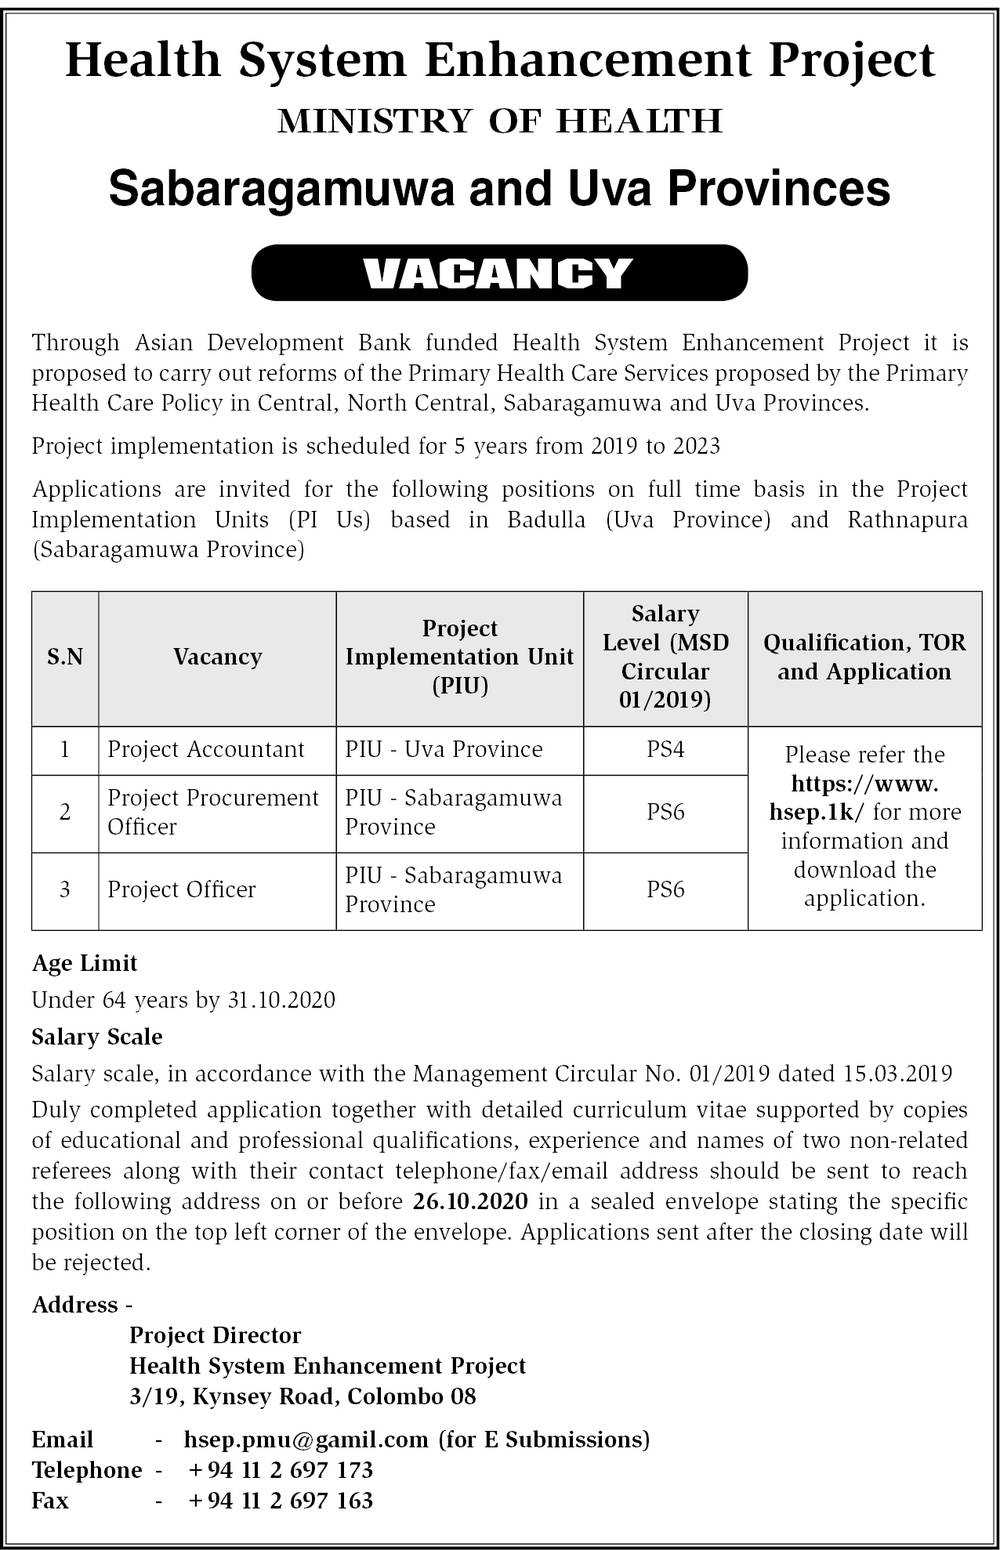 Project Accountant, Project Procurement Officer, Project Officer – Health System Enhancement Project – Ministry of Health